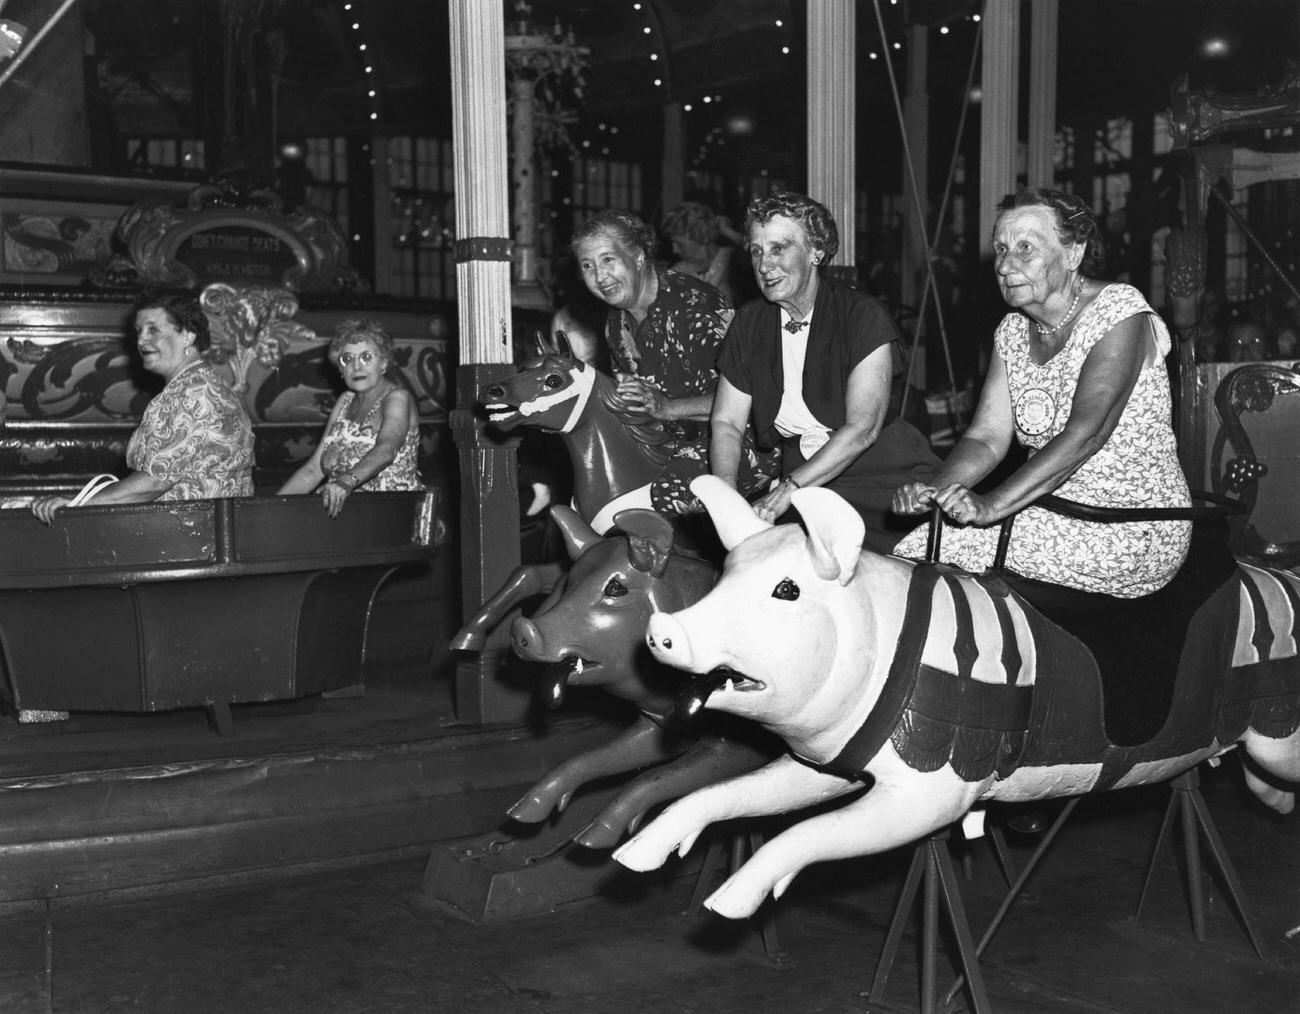 Grandmothers Ride Carousel Pigs At Steeplechase Park